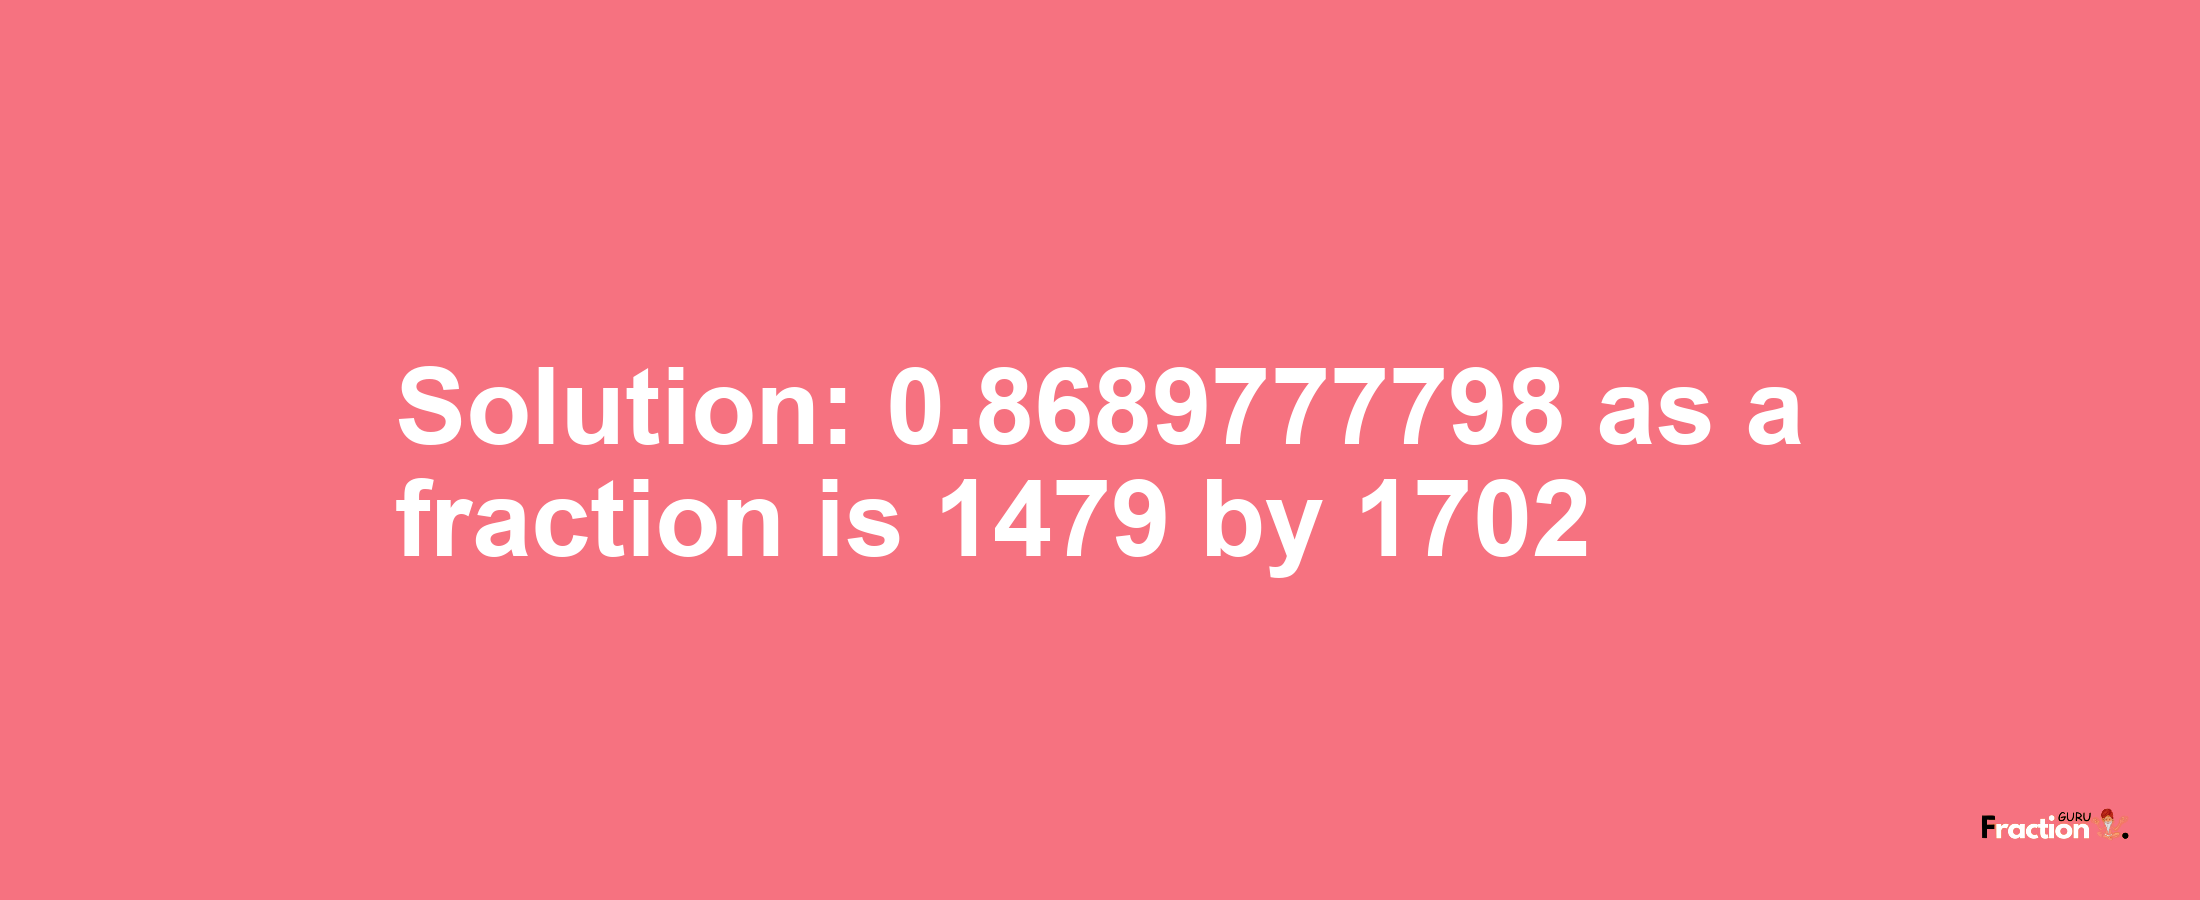 Solution:0.8689777798 as a fraction is 1479/1702